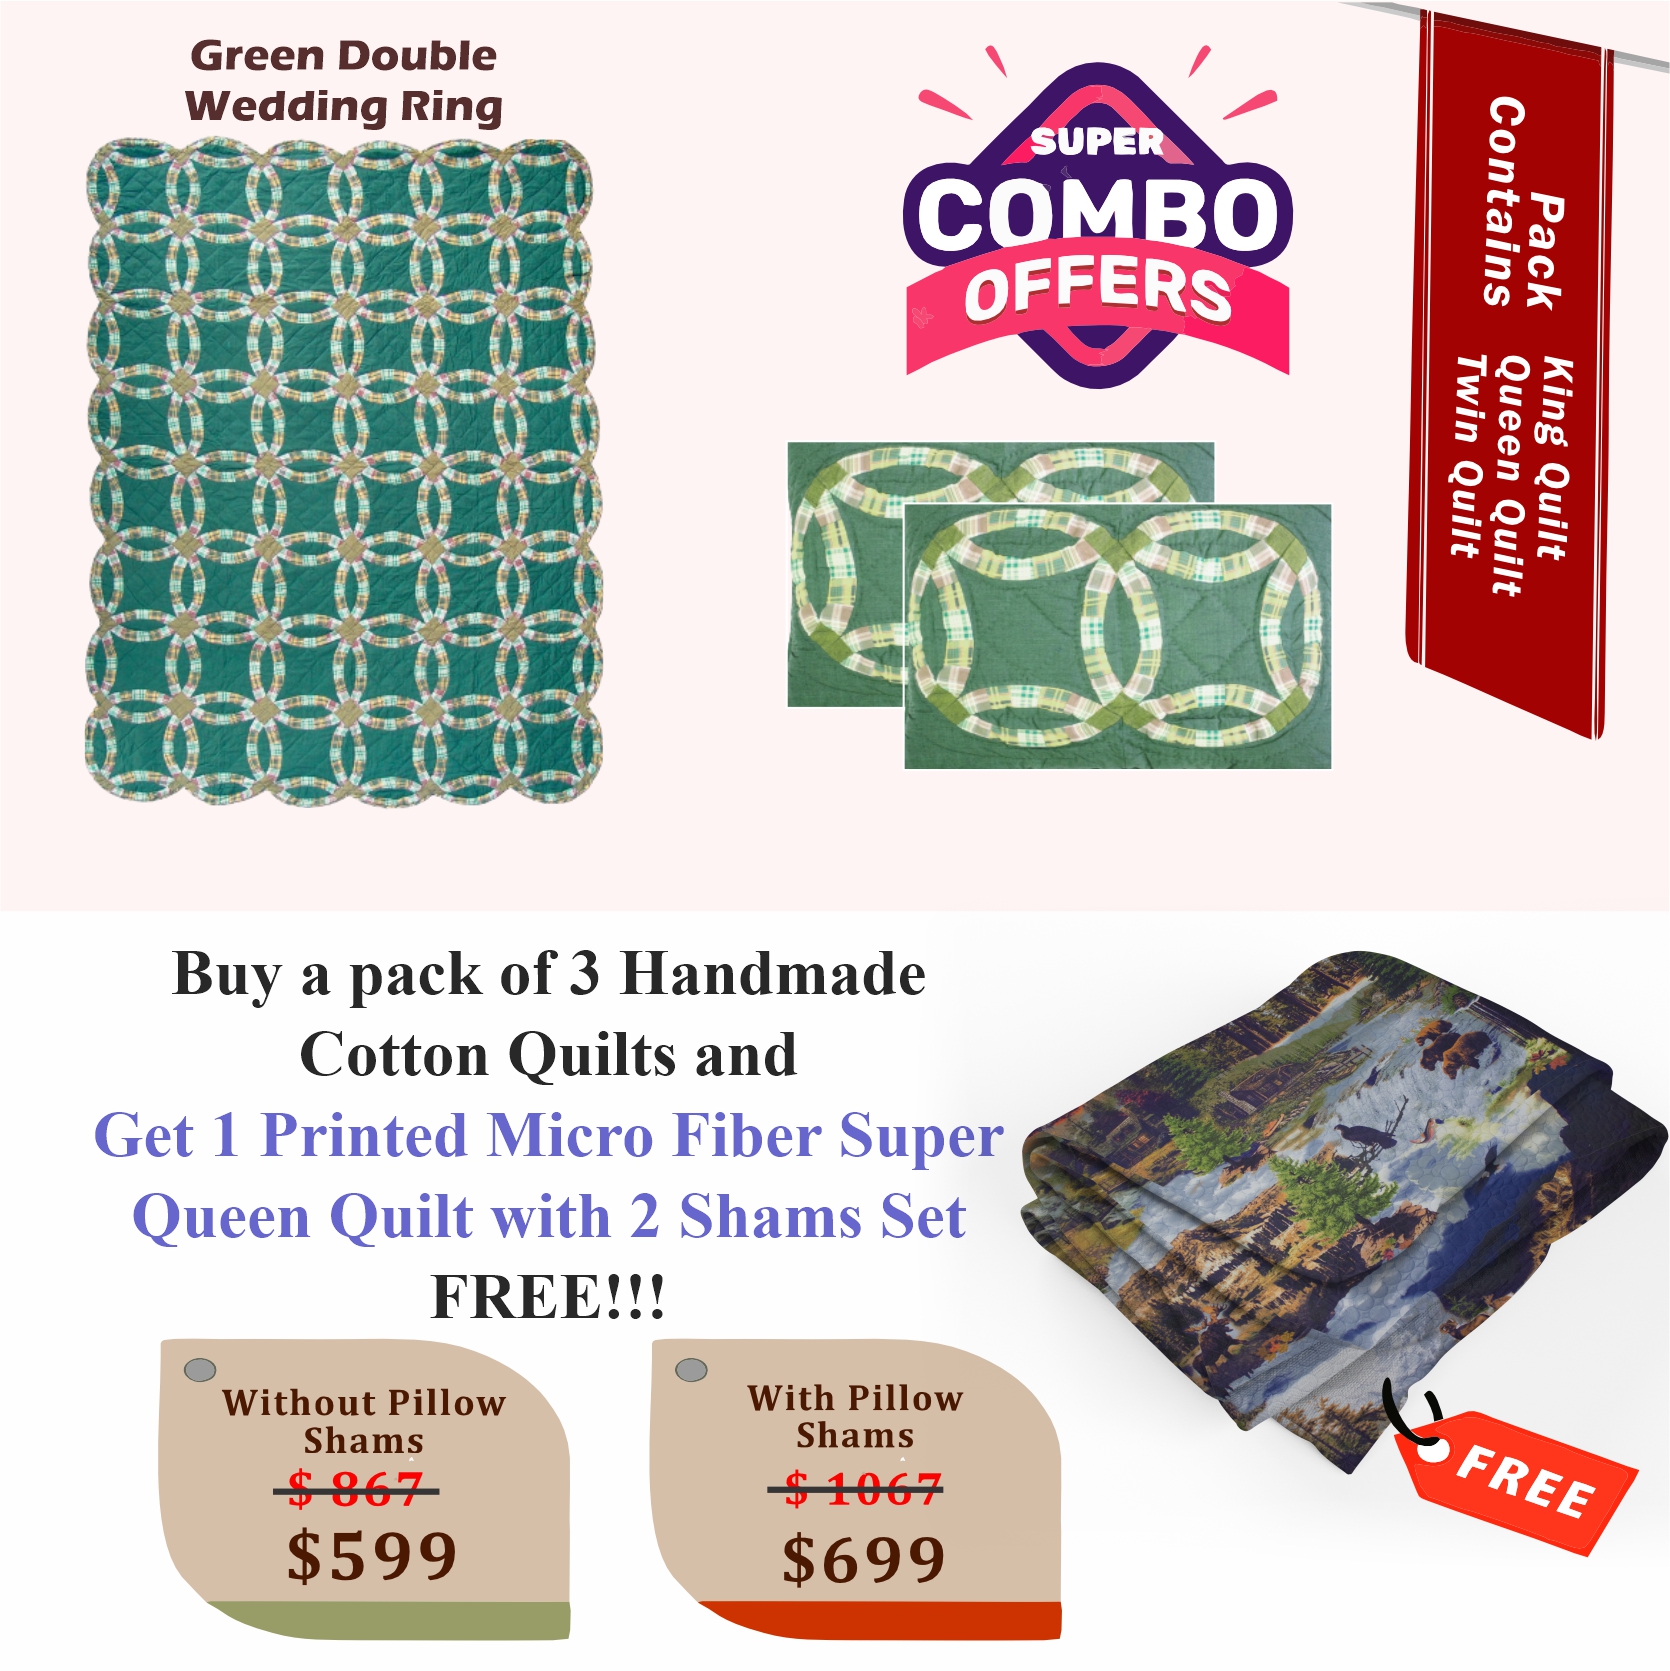 Green Cats Eye - Handmade Cotton quilts | Matching pillow shams | Buy 3 cotton quilts and get 1 Printed Microfiber Super Queen Quilt with 2 Shams set FREE